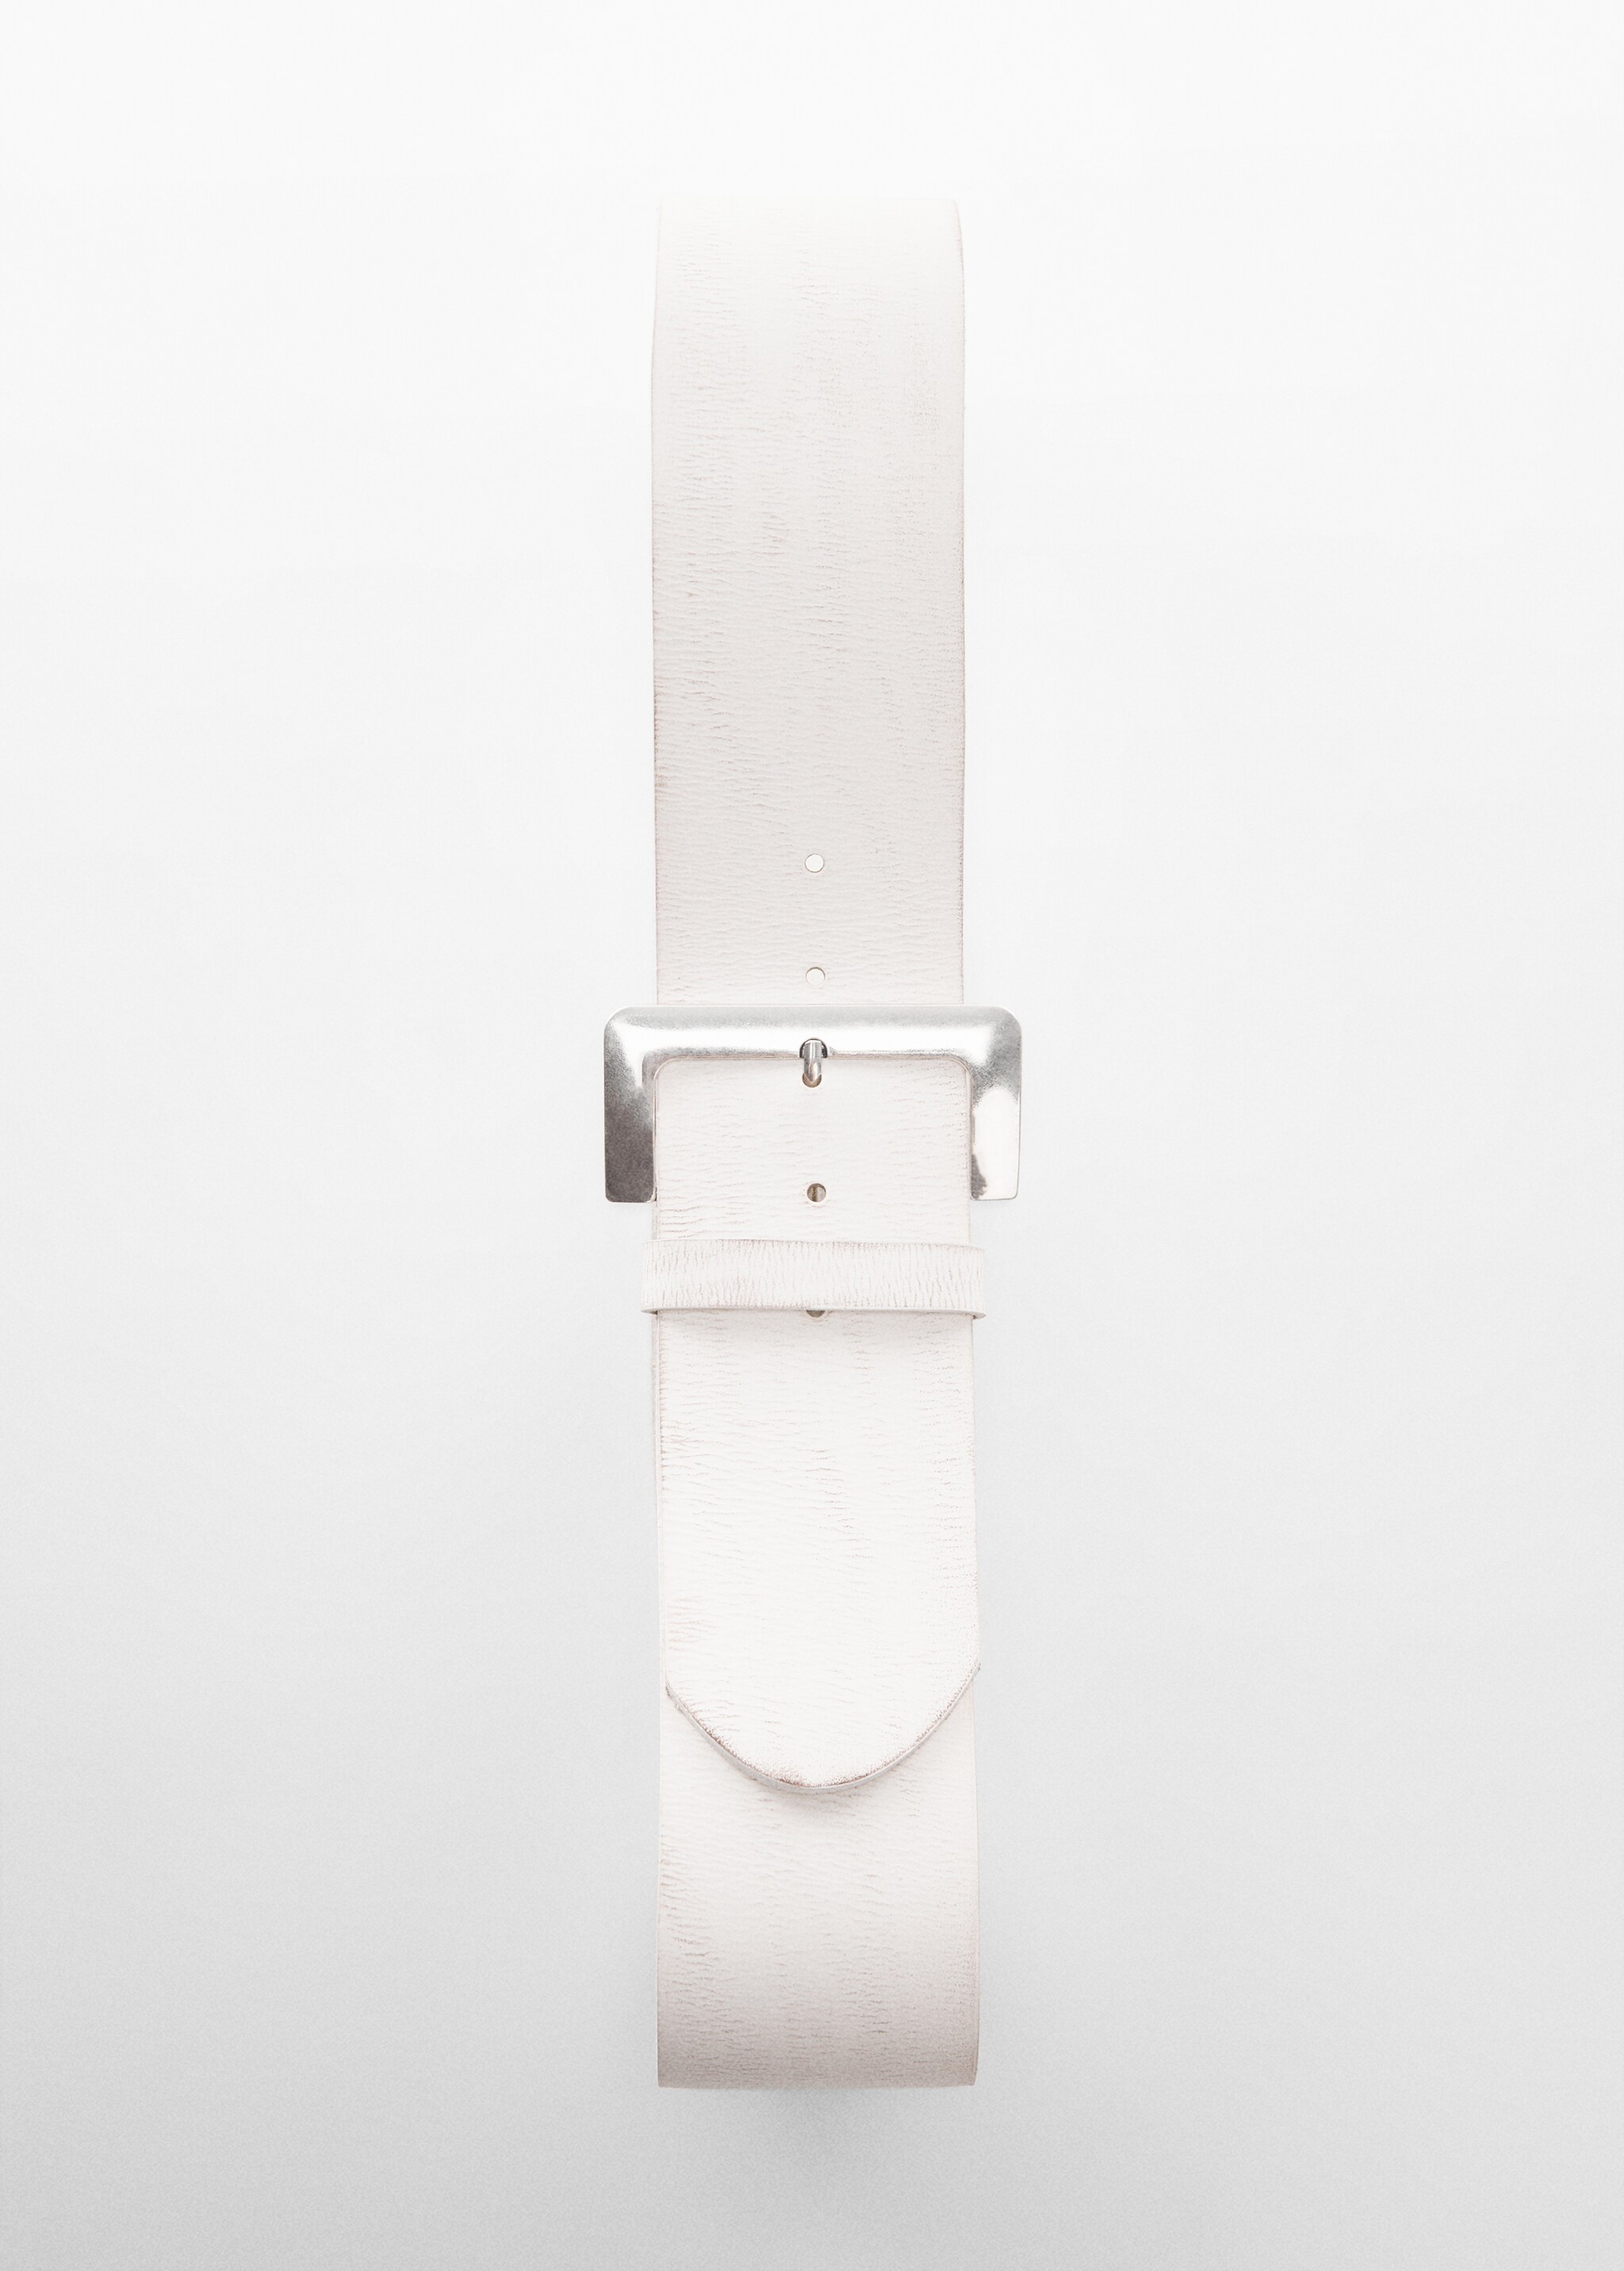 Wide leather belt - Details of the article 1